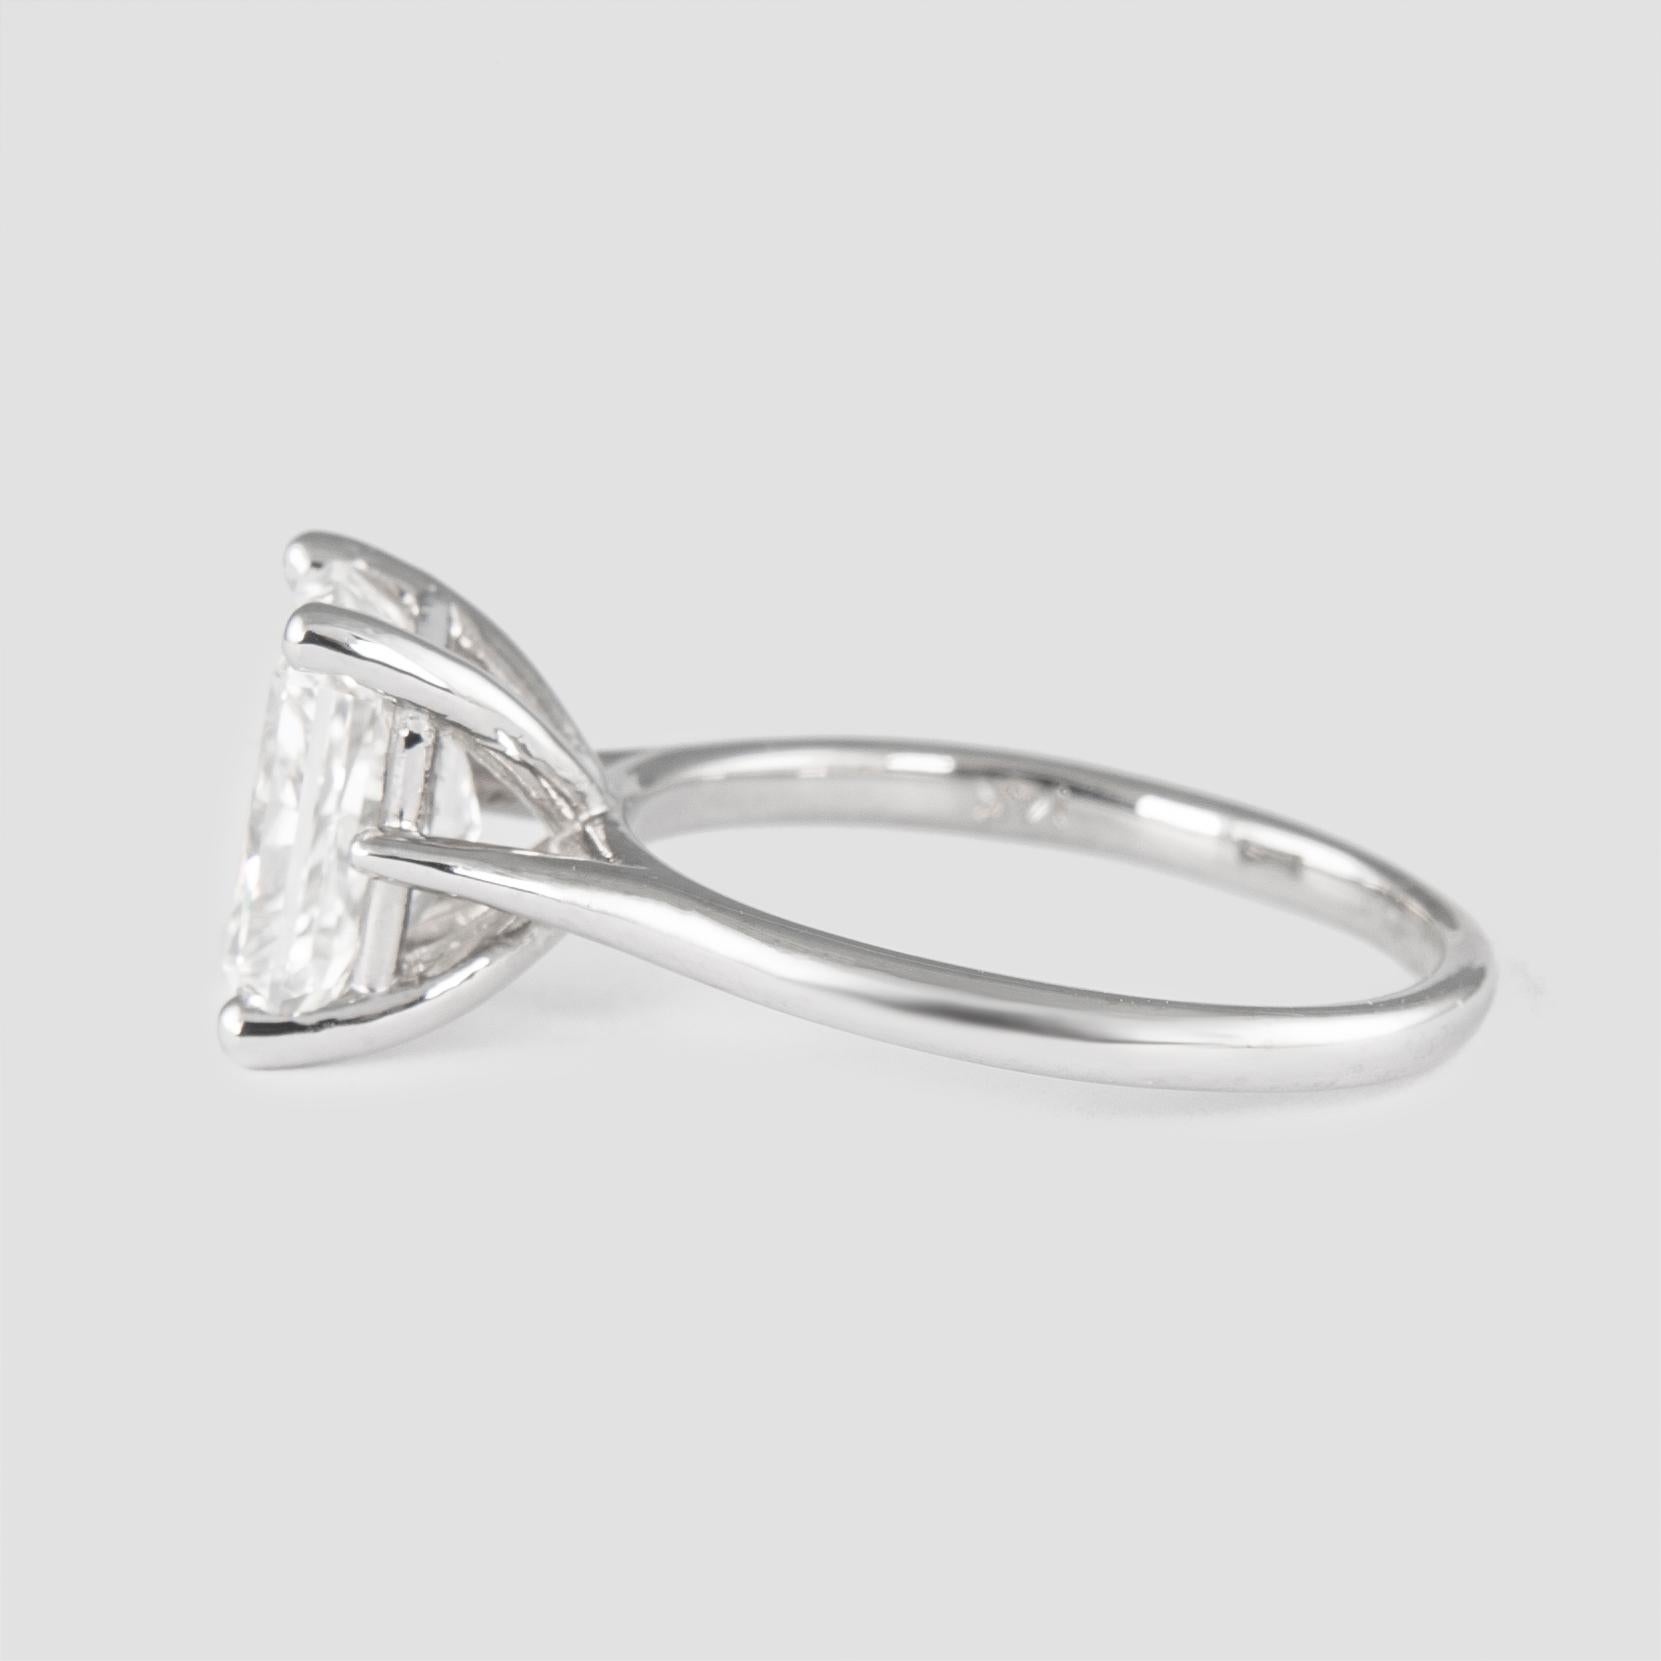 Contemporary GIA Certified 3.08 Carat Radiant Diamond Solitaire Ring 18 Karat White Gold